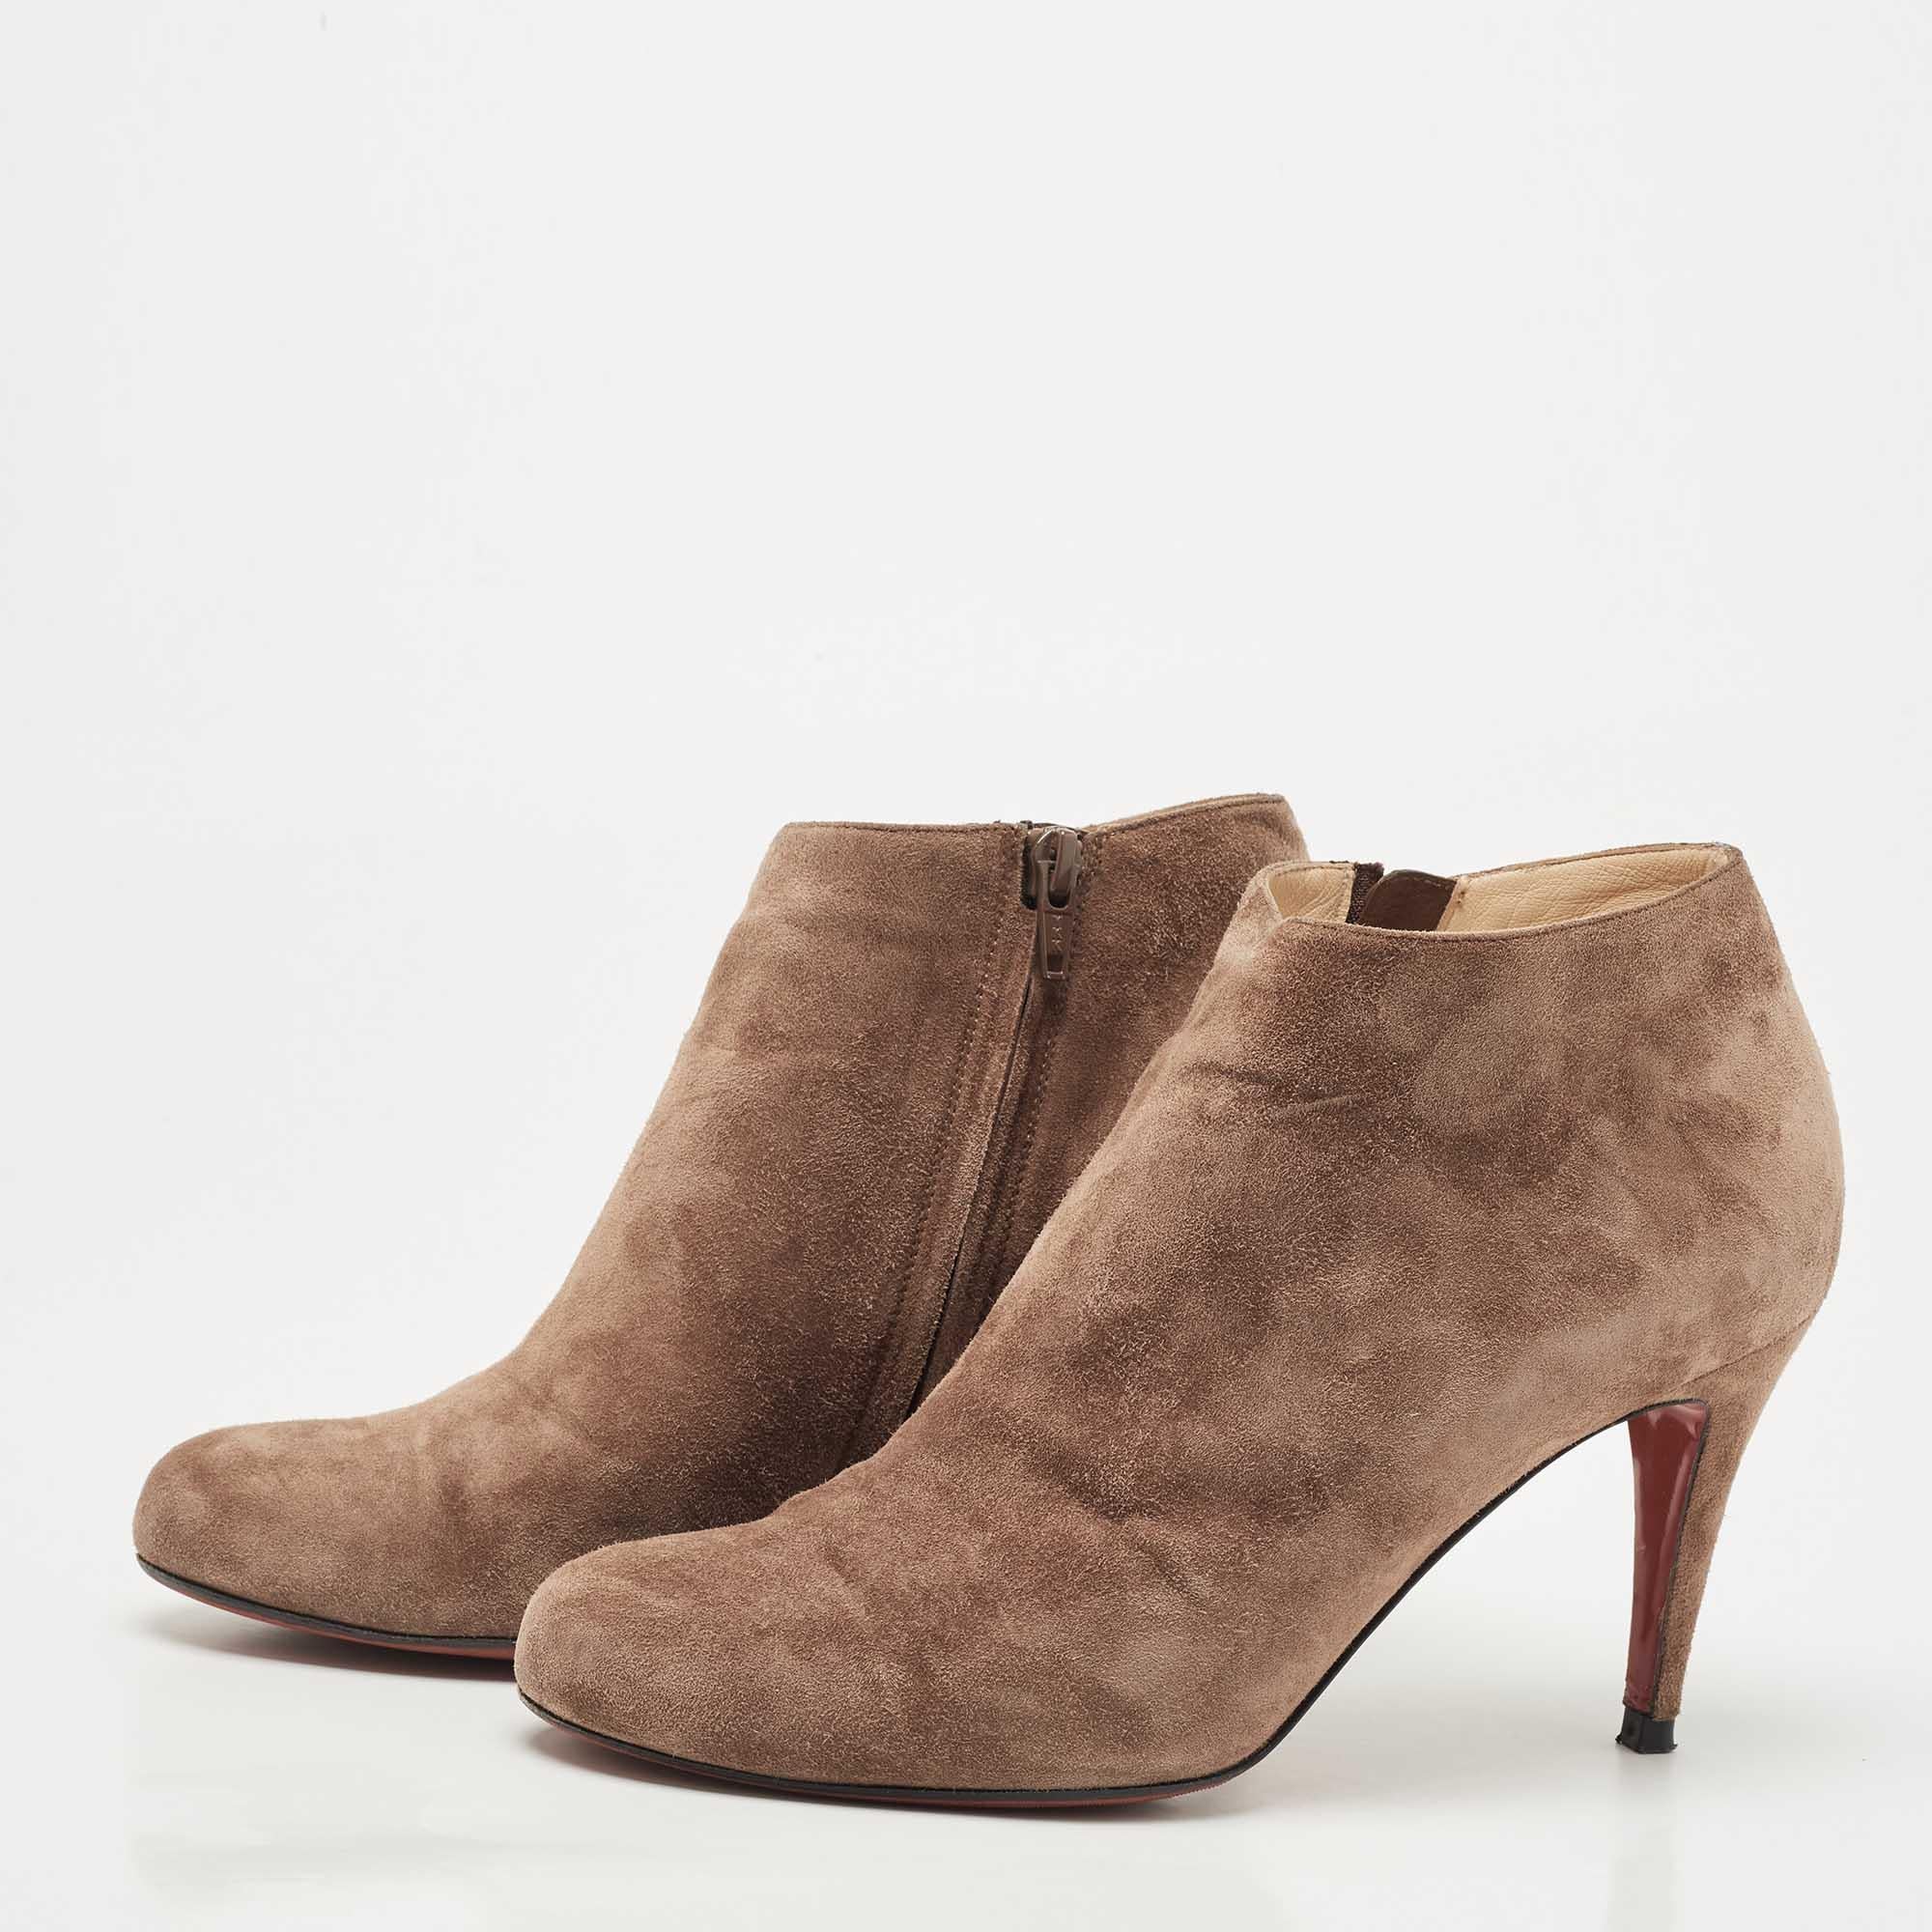 Enjoy the most fashionable days with these stylish booties. Modern in design and craftsmanship, they are fashioned to keep you comfortable and chic!

